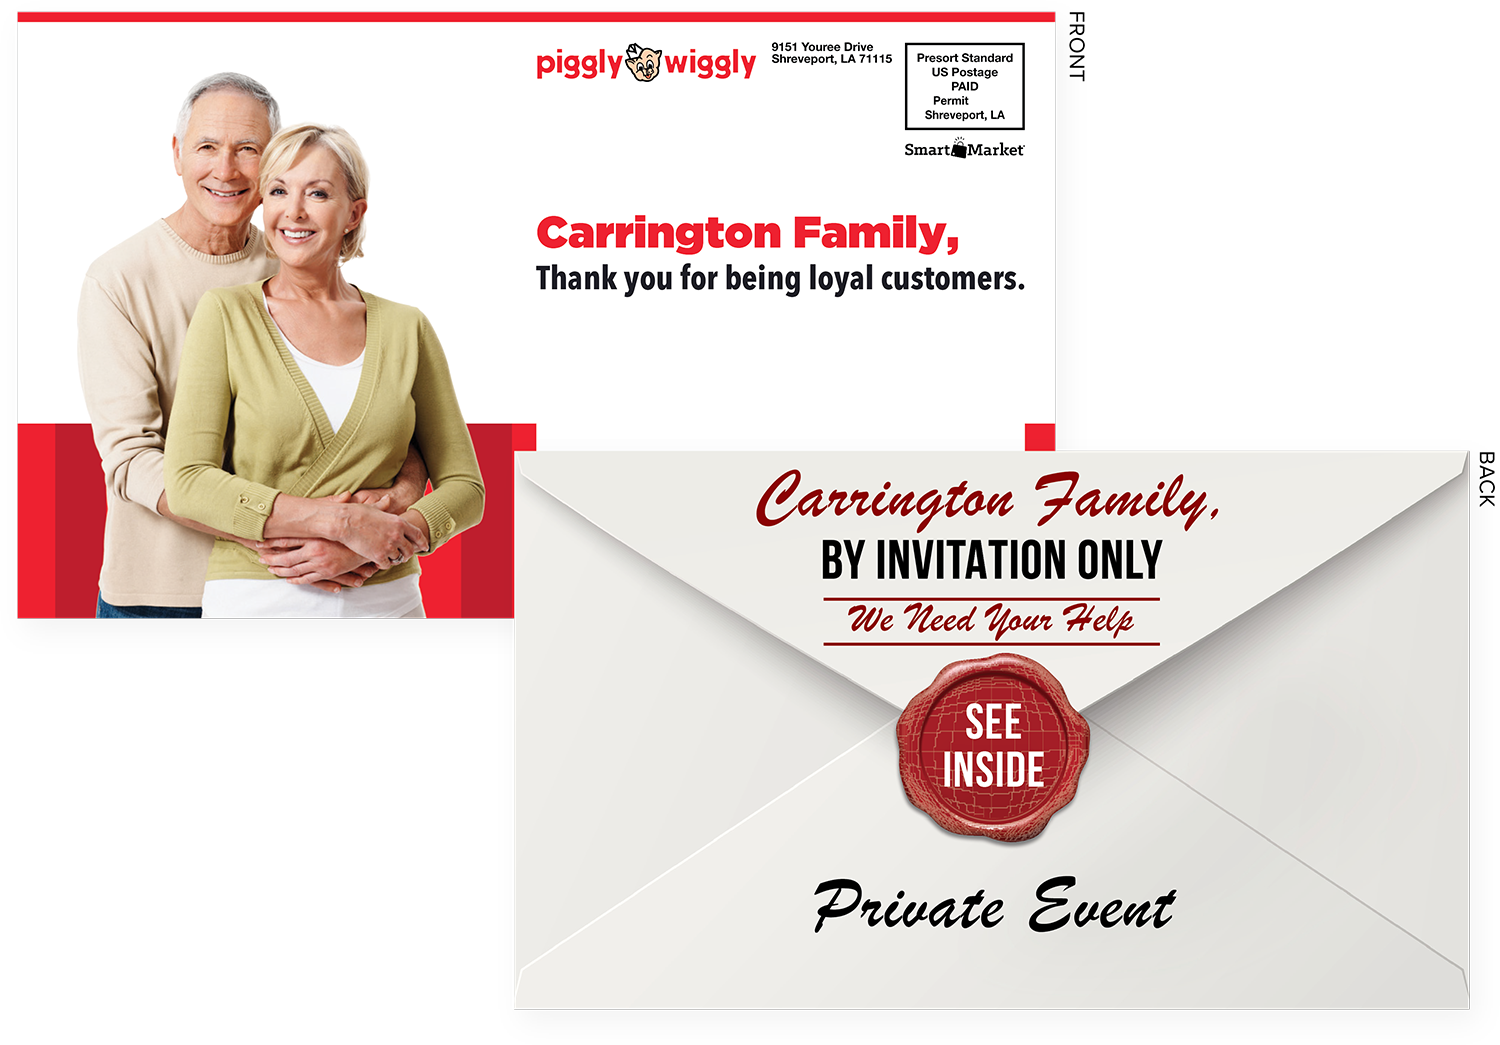 Piggly Wiggly Direct Mail